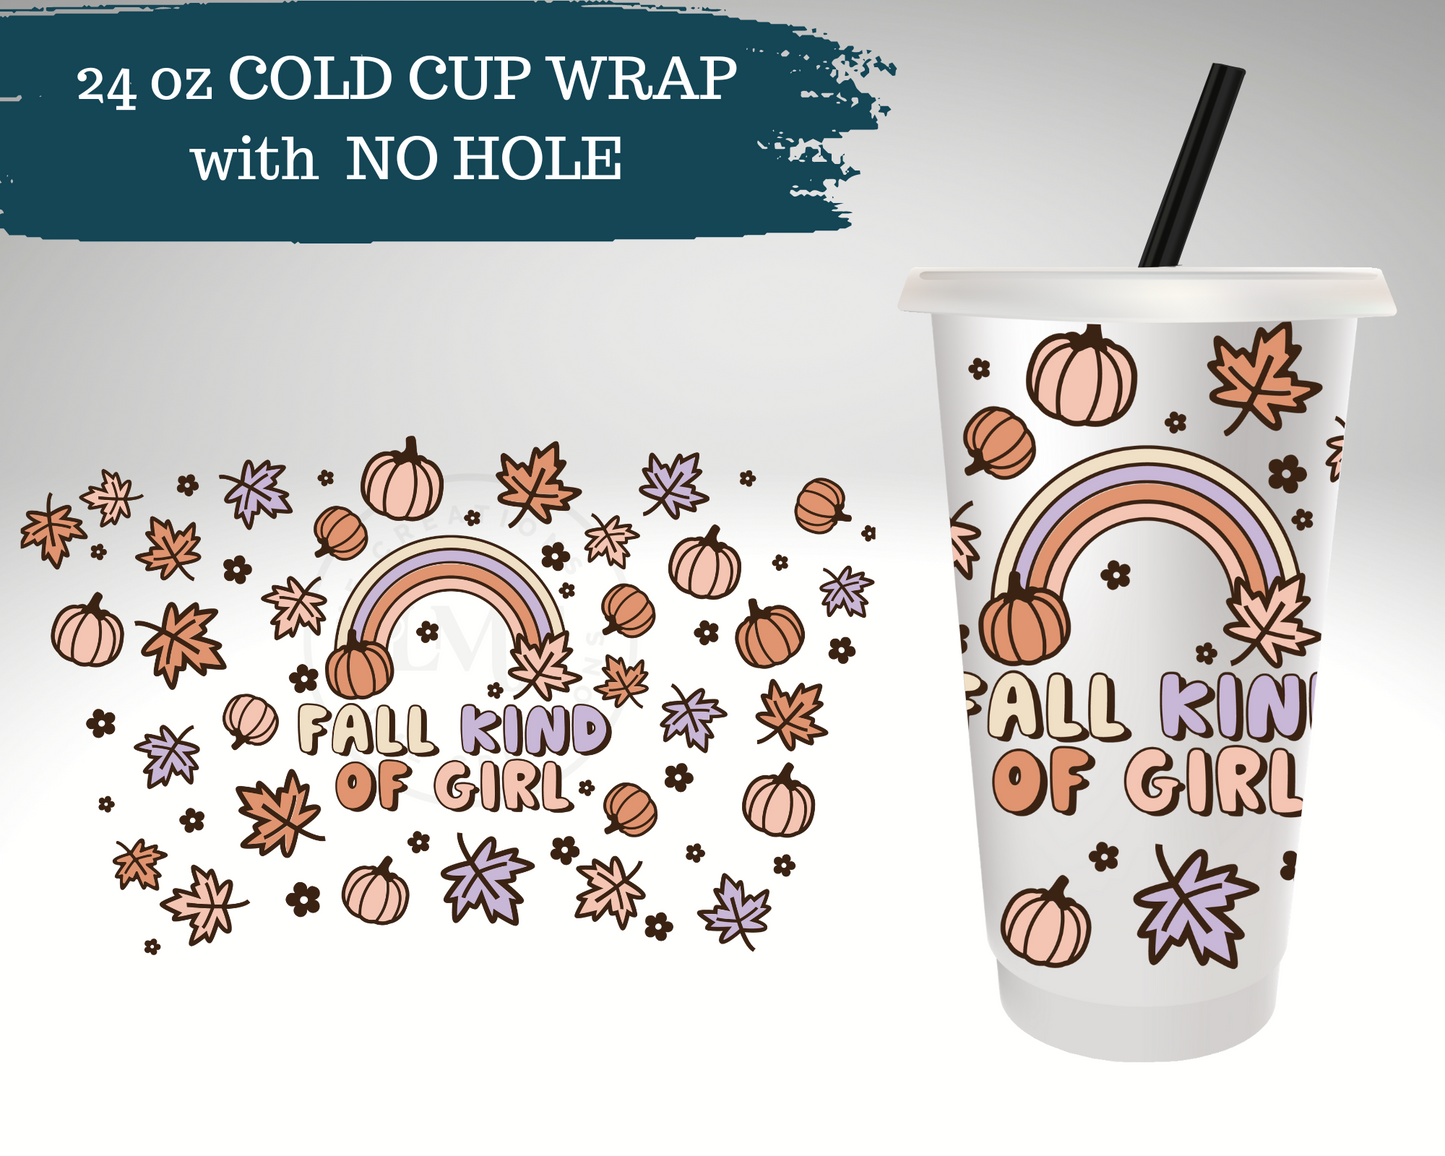 Fall Kind Of Girl | Cup Wrap | No Hole